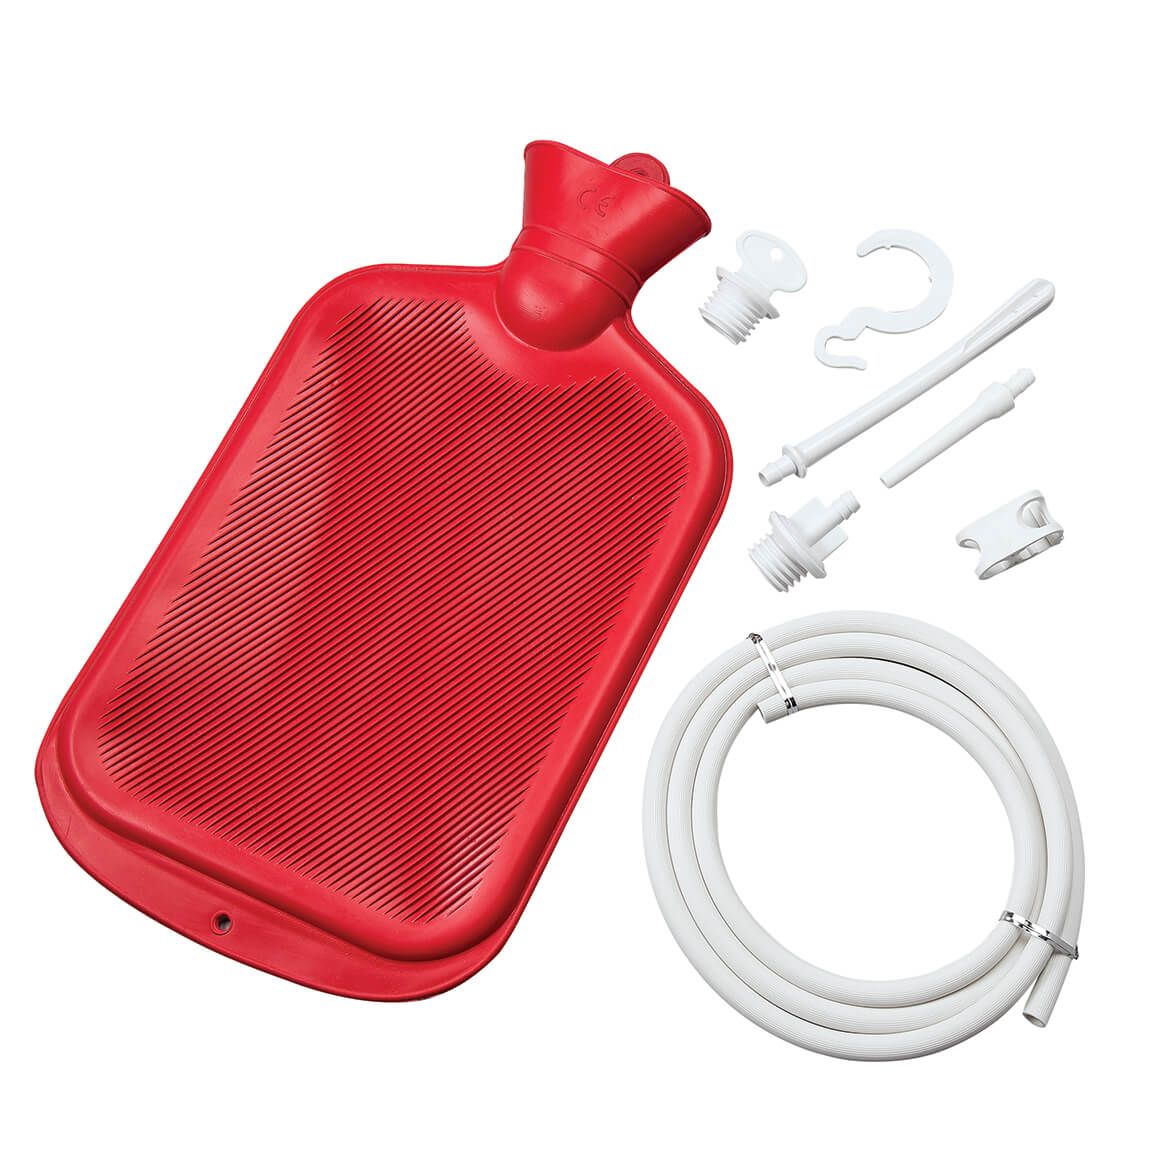 Hot and Cold Water Bottle System + '-' + 332667